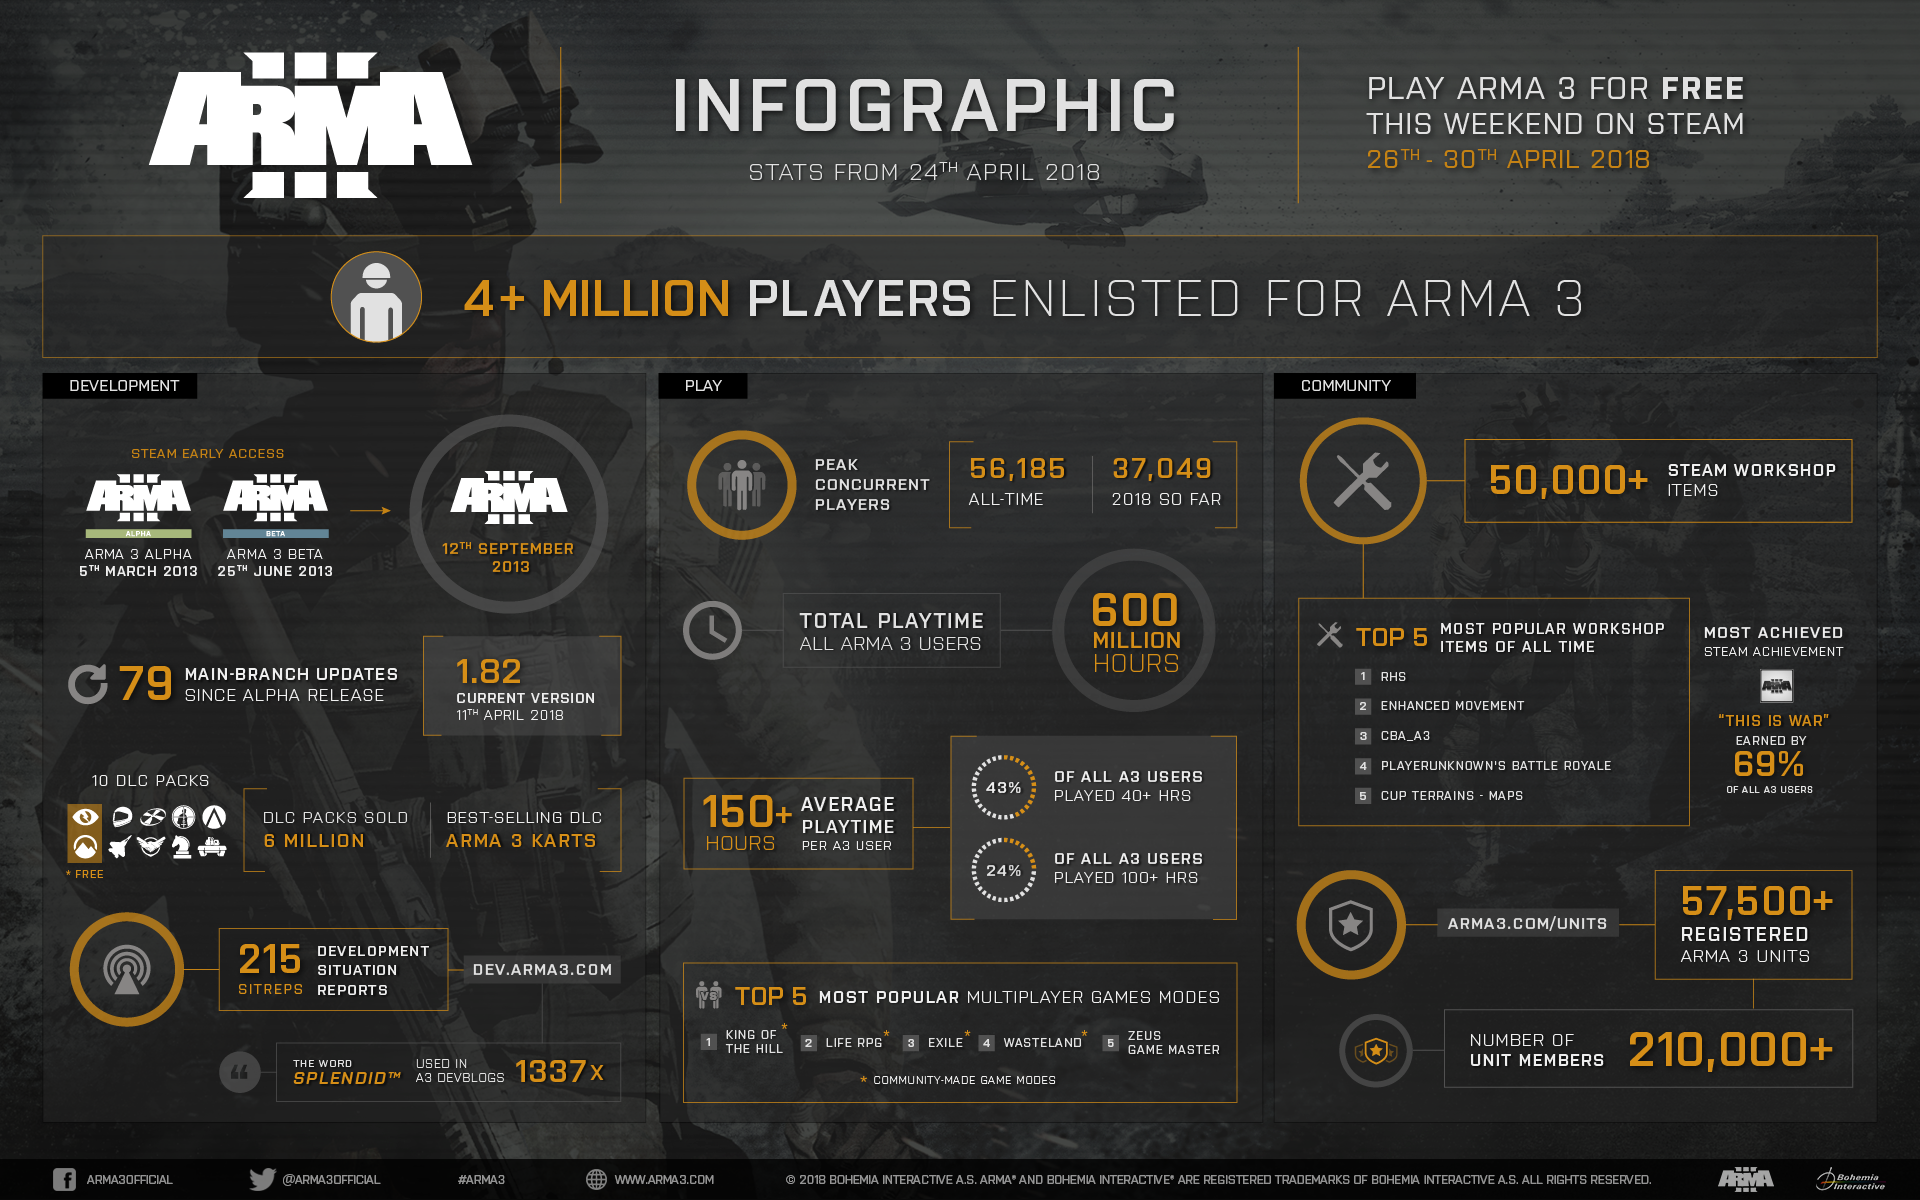 ARMA 3 Infographic Stats and Free Steam Weekend, need details?